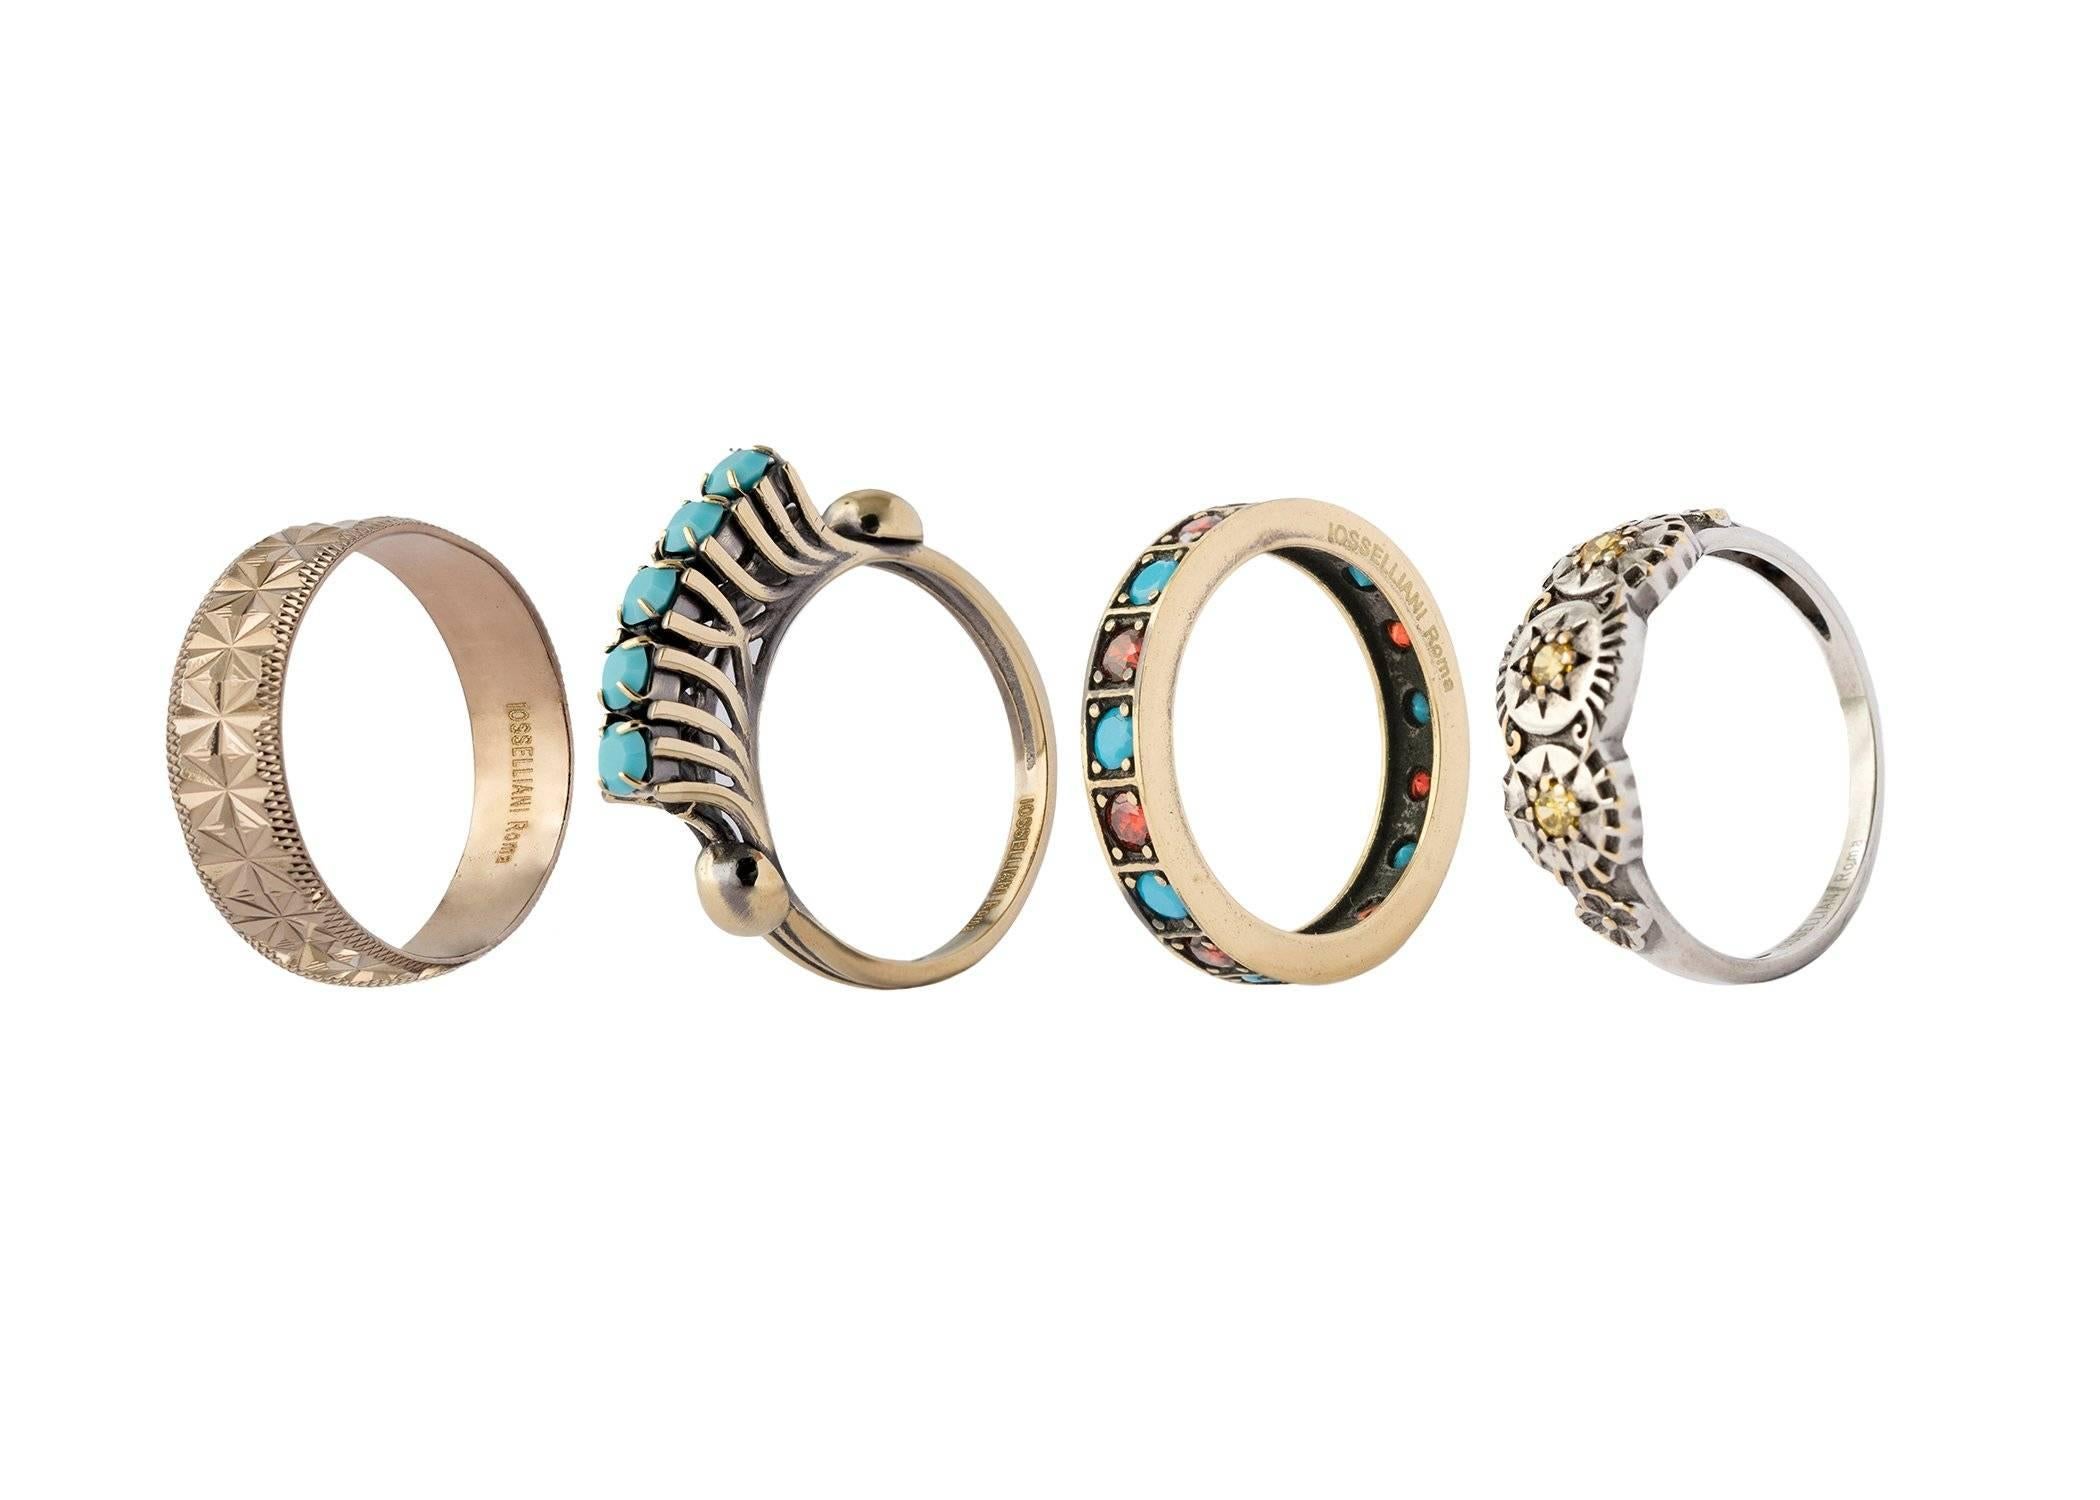 The Eleguà collection set of rings features four different rings projecting the stacking effect. A diamond cut band is mixed with colorful rings to inject a dose of color into accessories. Zircons are set by hand creating a shimmering effect. Wear